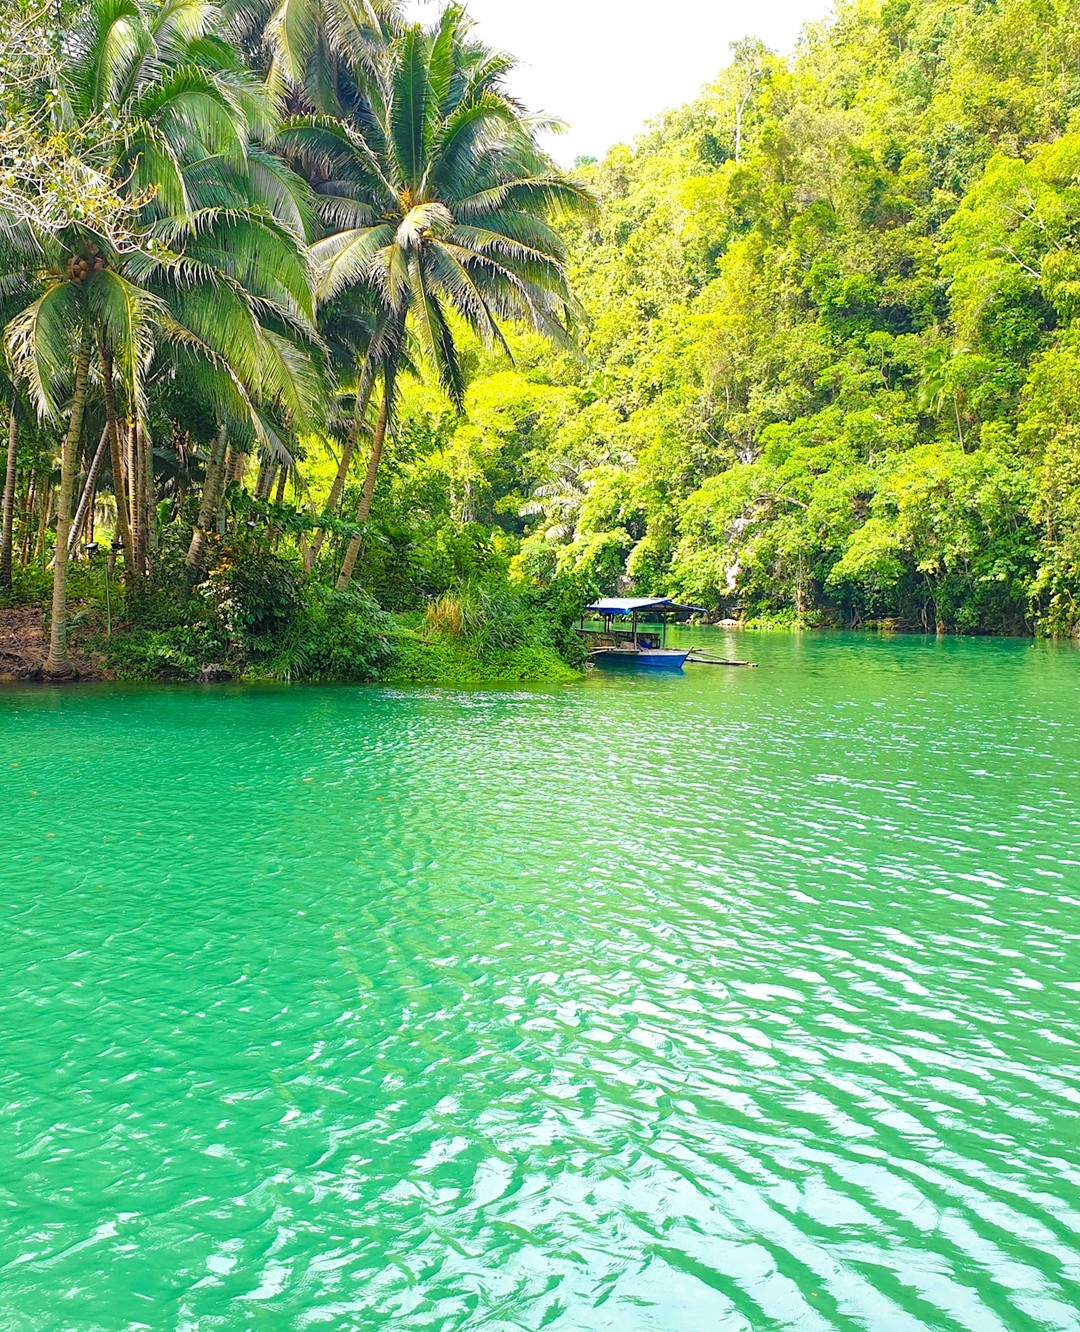 There’s nothing quite like the beauty of the Loboc river in the Philippines - with the option to do so many amazing activities such as firefly watching, and even paddleboard yoga!

After seeing so many beautiful places, it’s getting harder and harder to choose a favourite! Where’s the most beautiful place you have ever been to? 🏝🧡
.
.
.
.
.
.
#travelblogger #travelexperience #travelbloggers #travel #traveladventure #travel_ig #tbloggers #tblogger #backpackerstory #photographytravel #instatravel #lobocriver #bohol #philippines #travelgram #traveller #traveling #travelingram #travelinggram #travellers #travellife #globetrotter #traveltheworld #photography #instapassport #wanderlust #myinstatravel #traveldiaries #traveladdict #oceanvibes